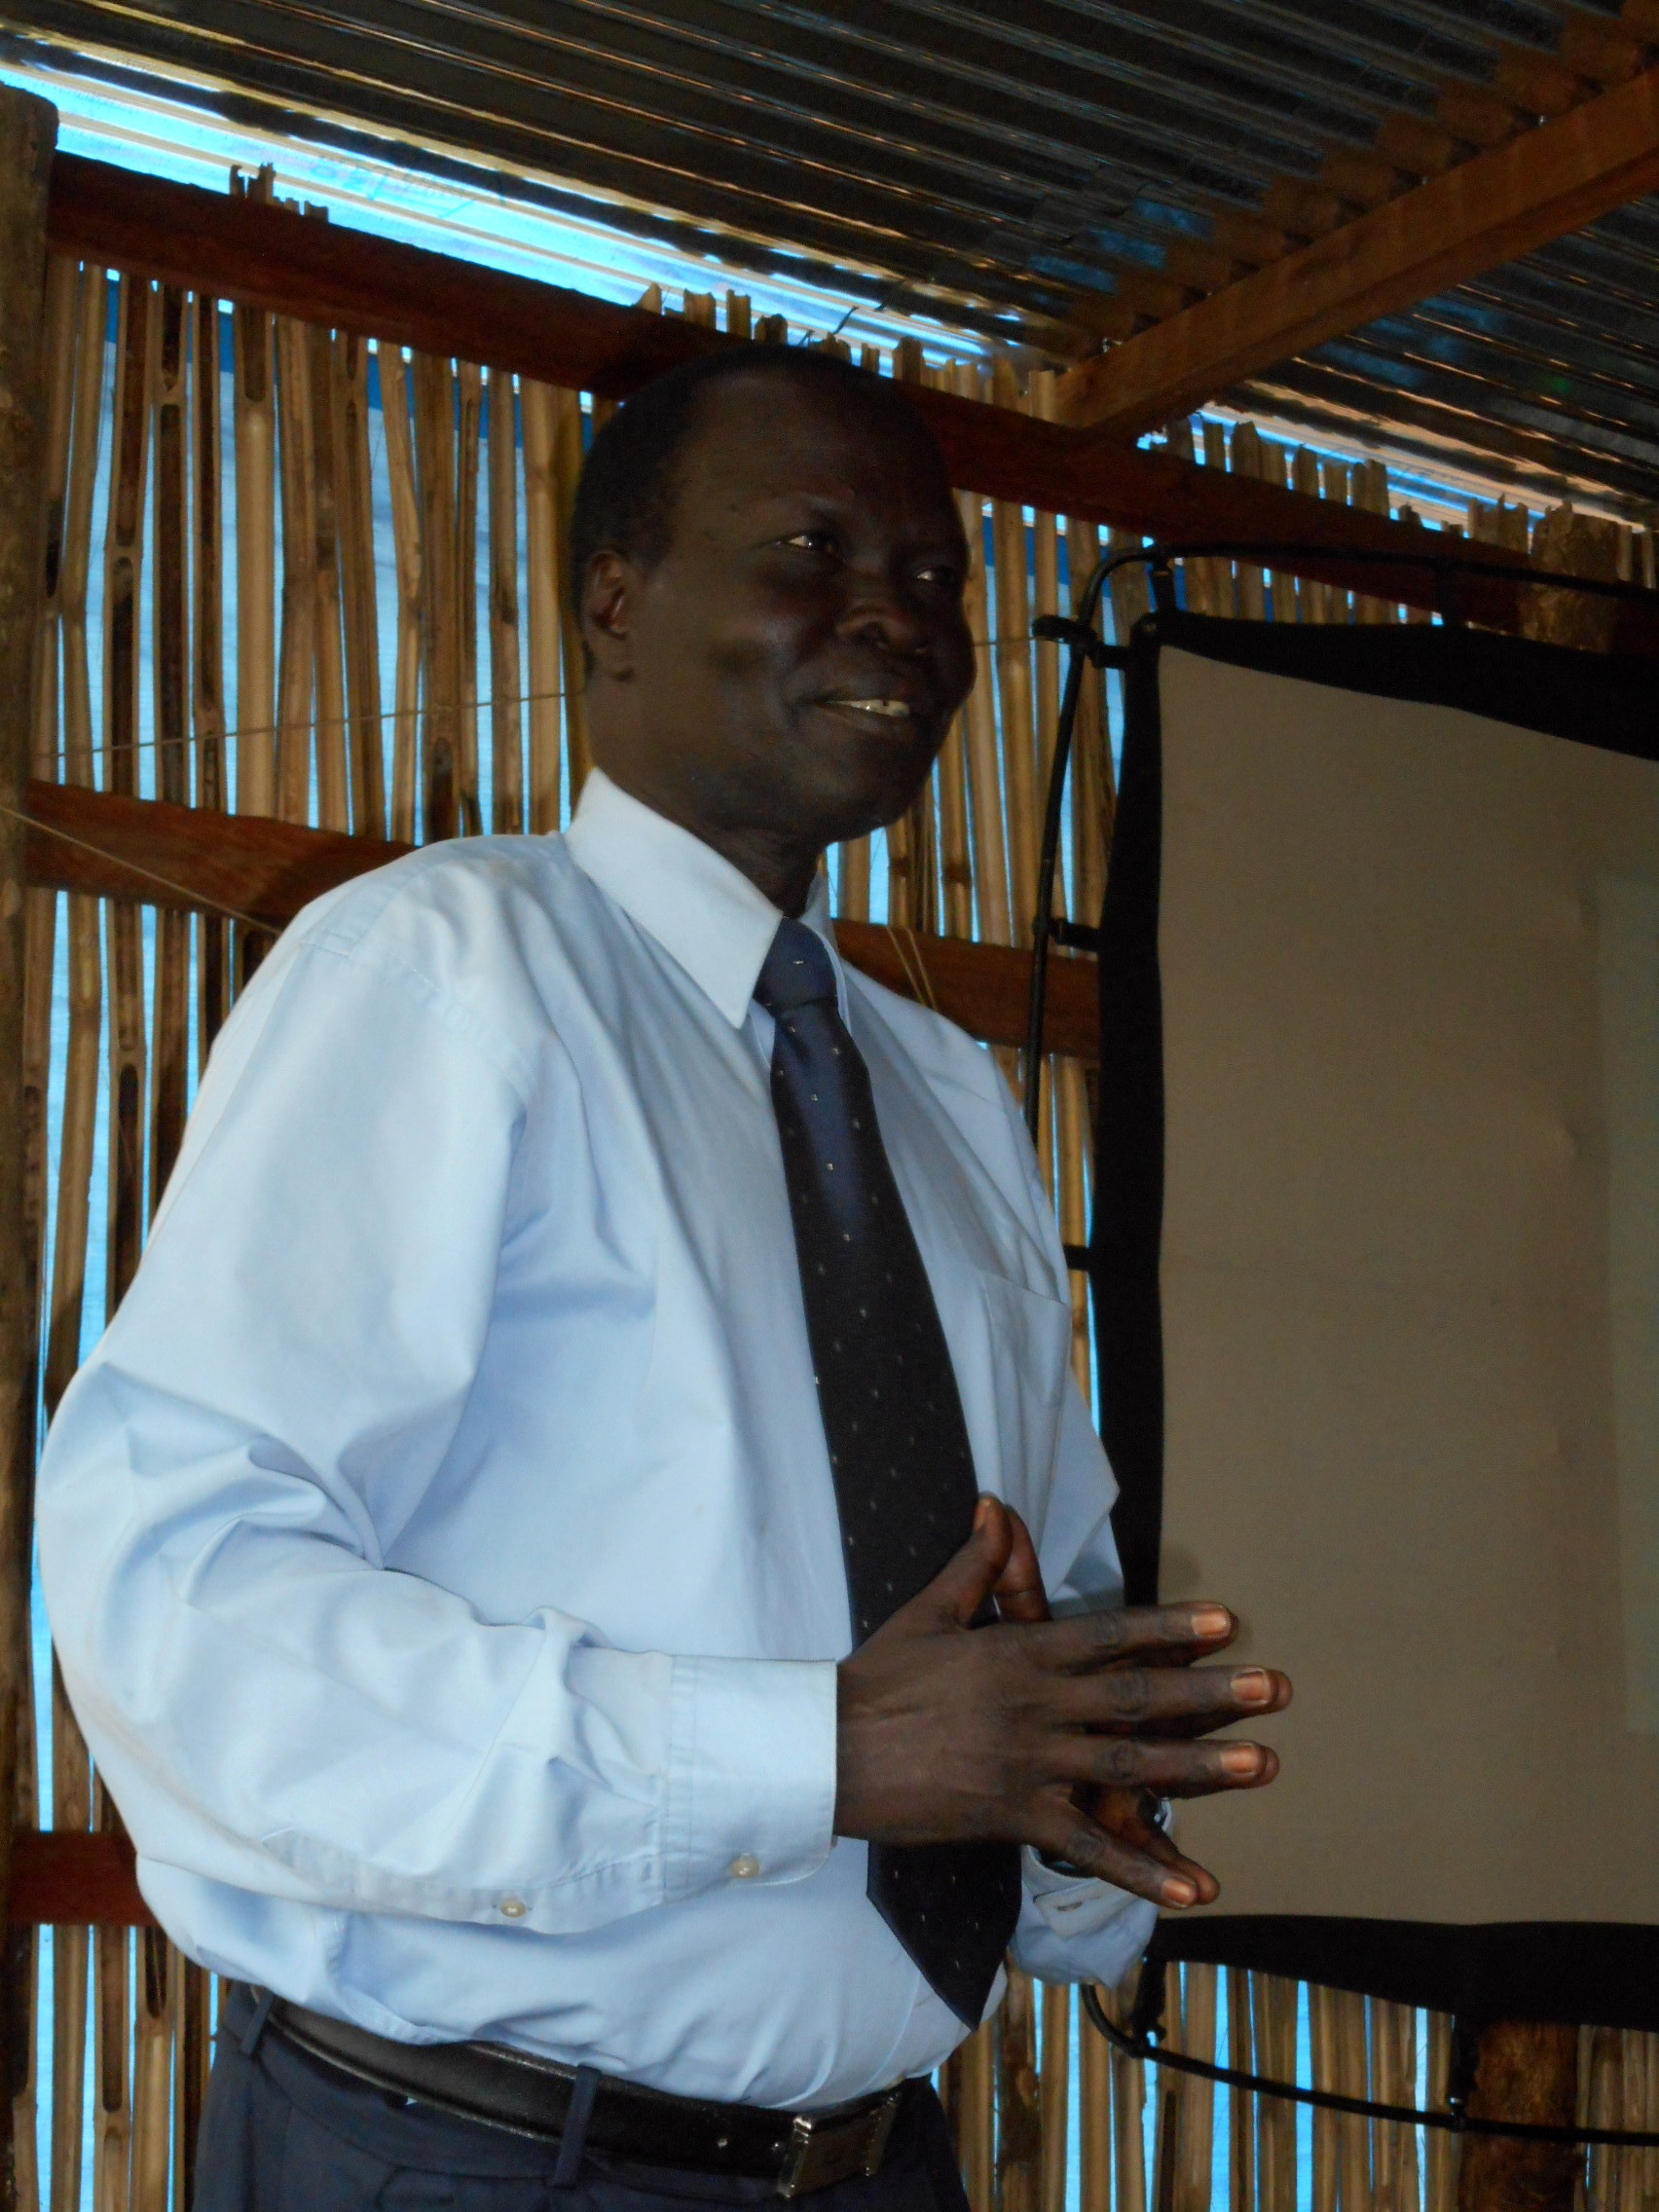 Rev. Santino, principal of Nile Theological College, shares a message of encouragement with students.